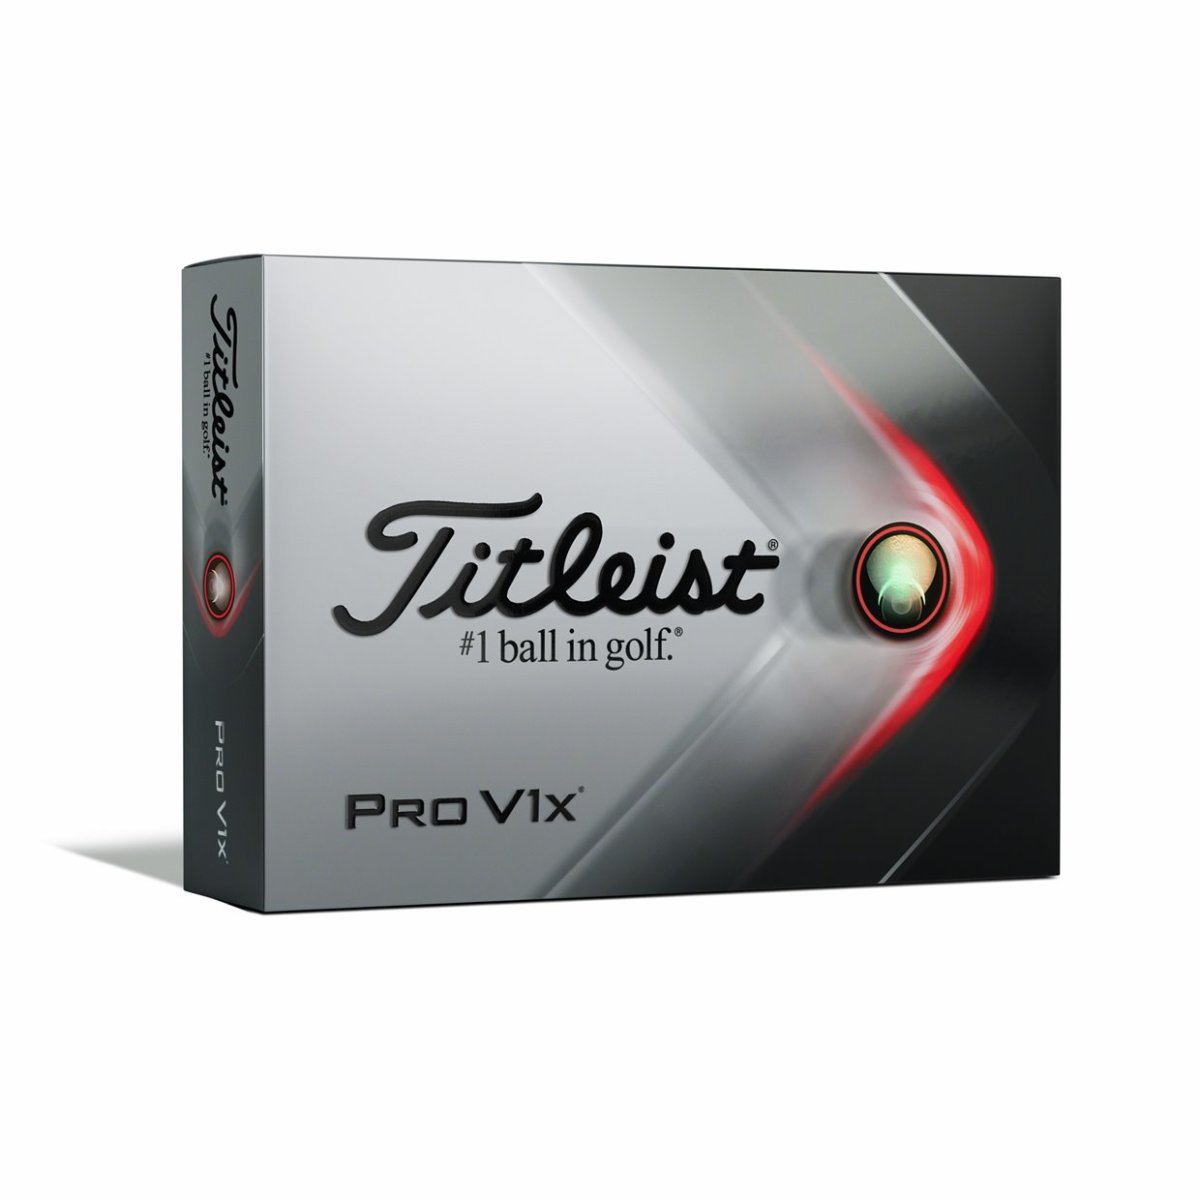 Shop the best Titleist golf balls - like the Pro V1x - on Morning Read's online pro shop.